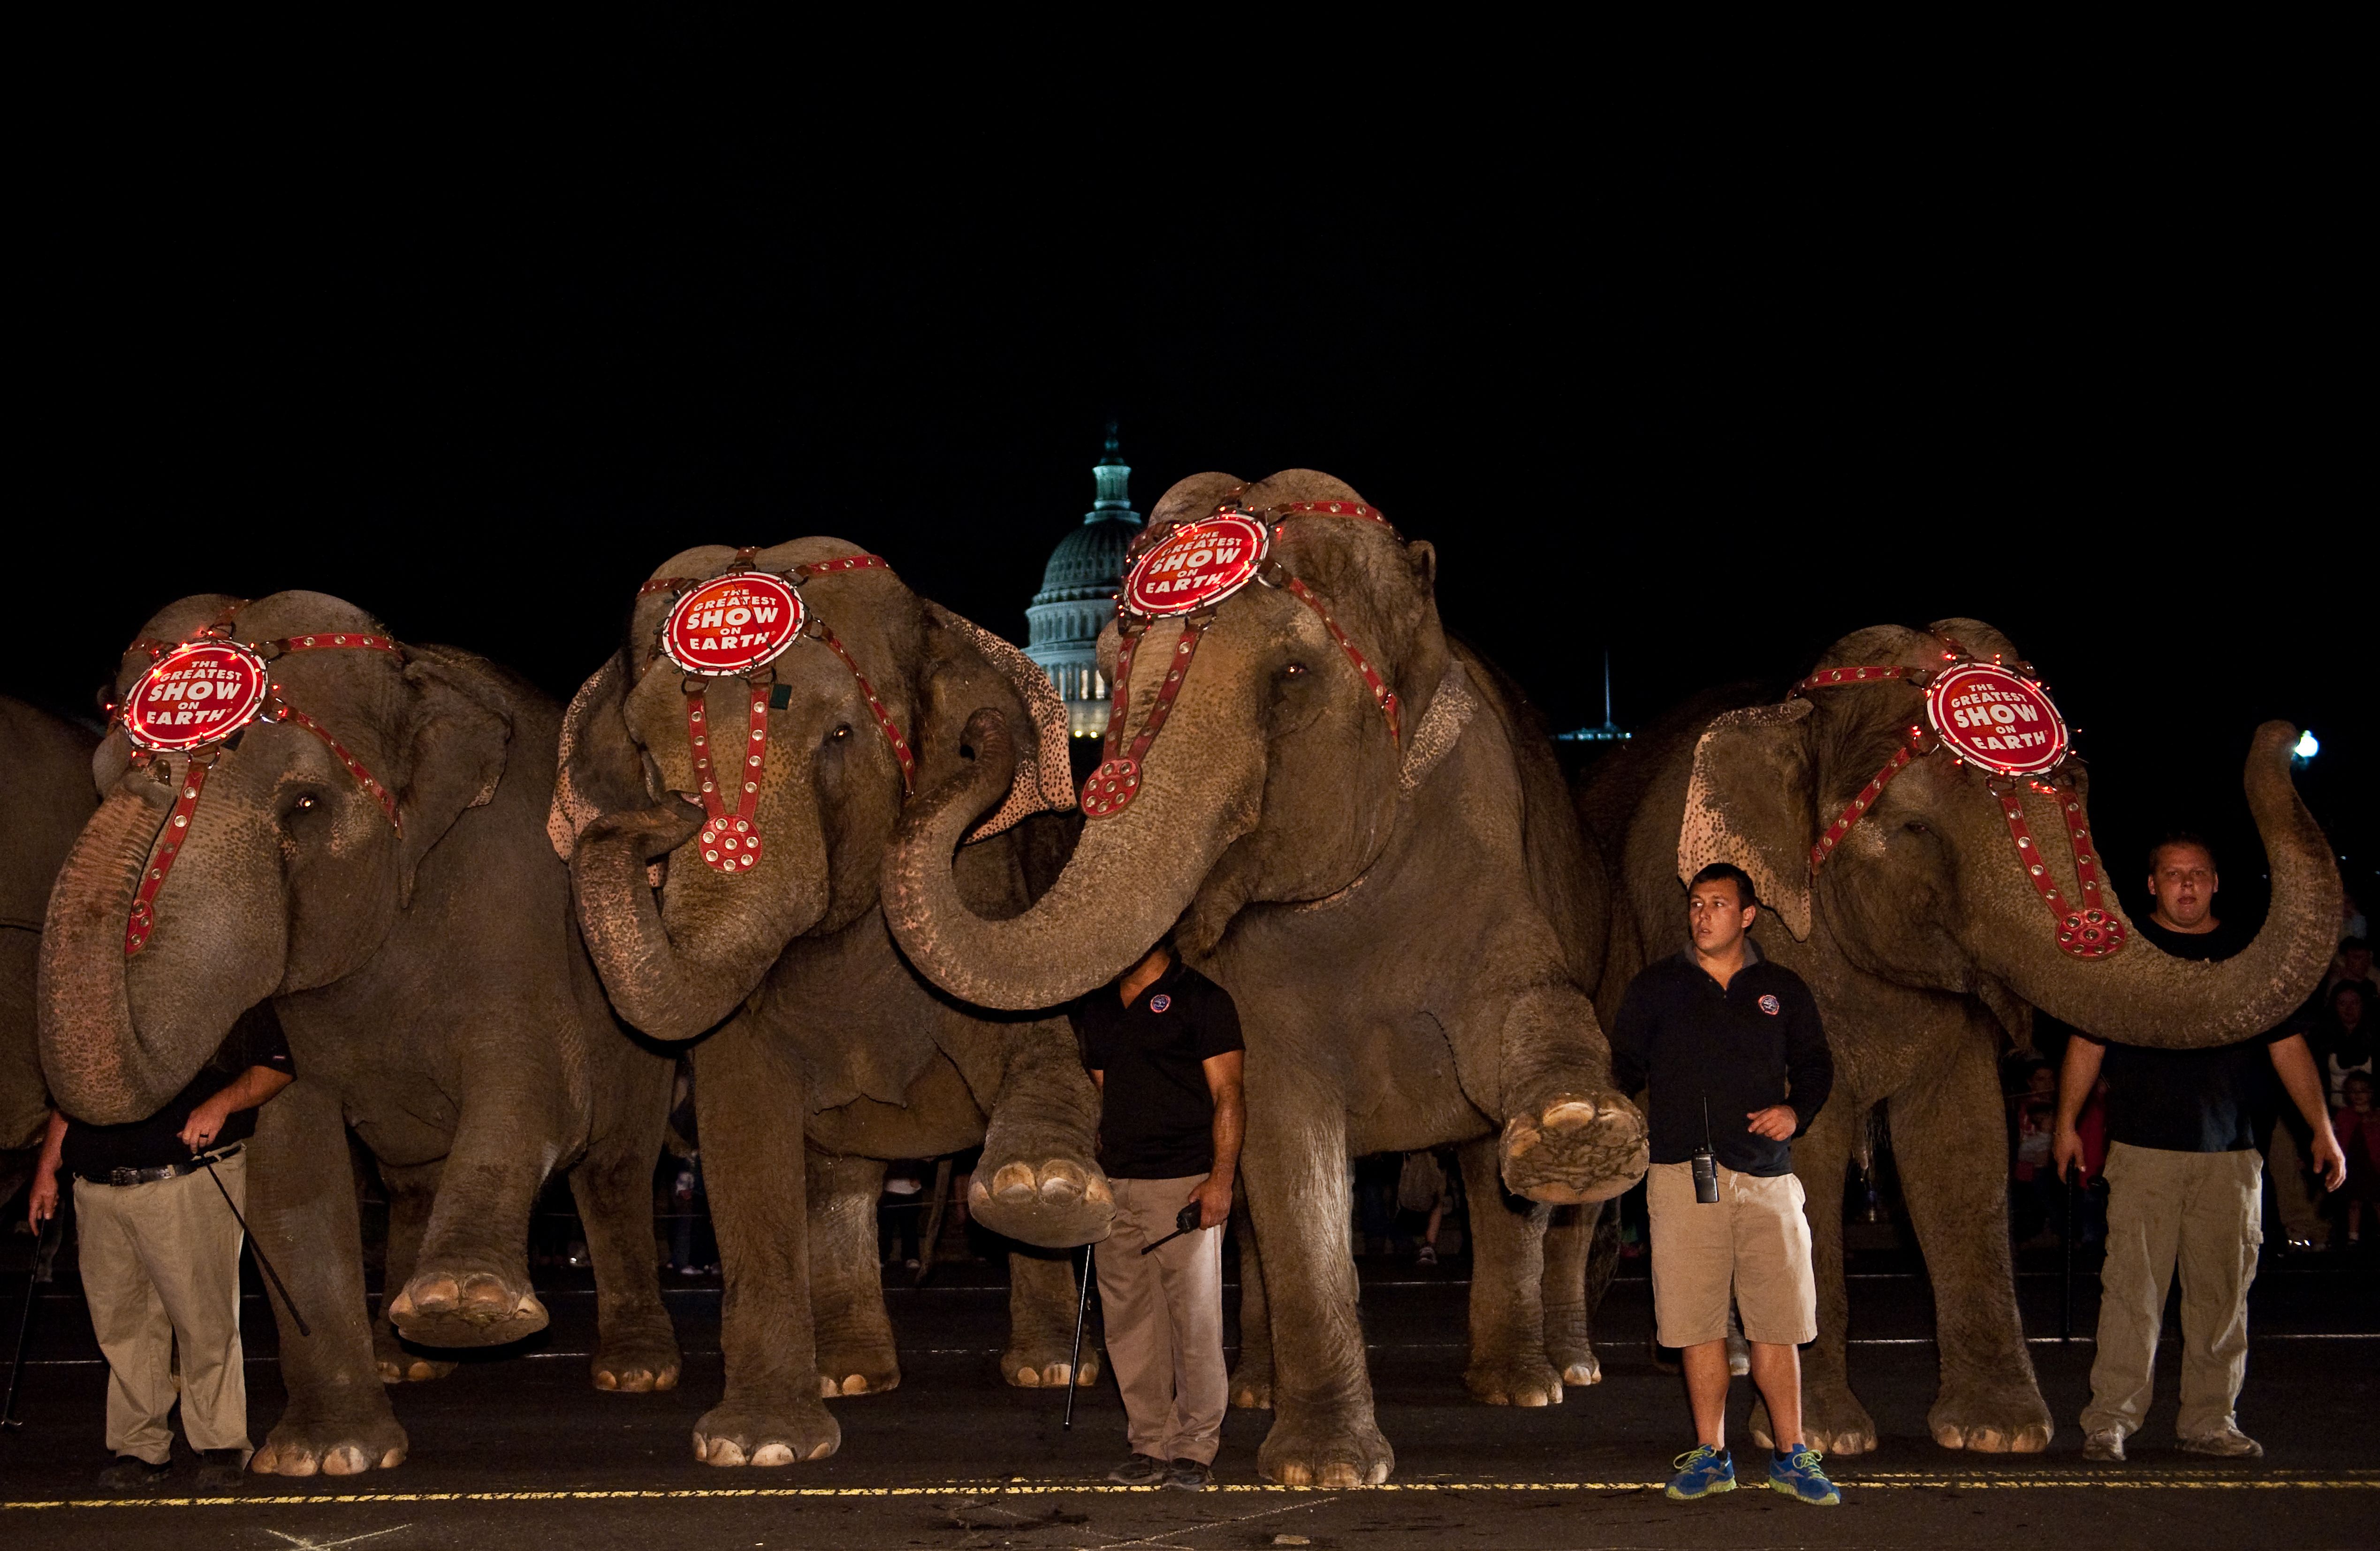 Animal rights group pays settlement in circus elephant case | CNN